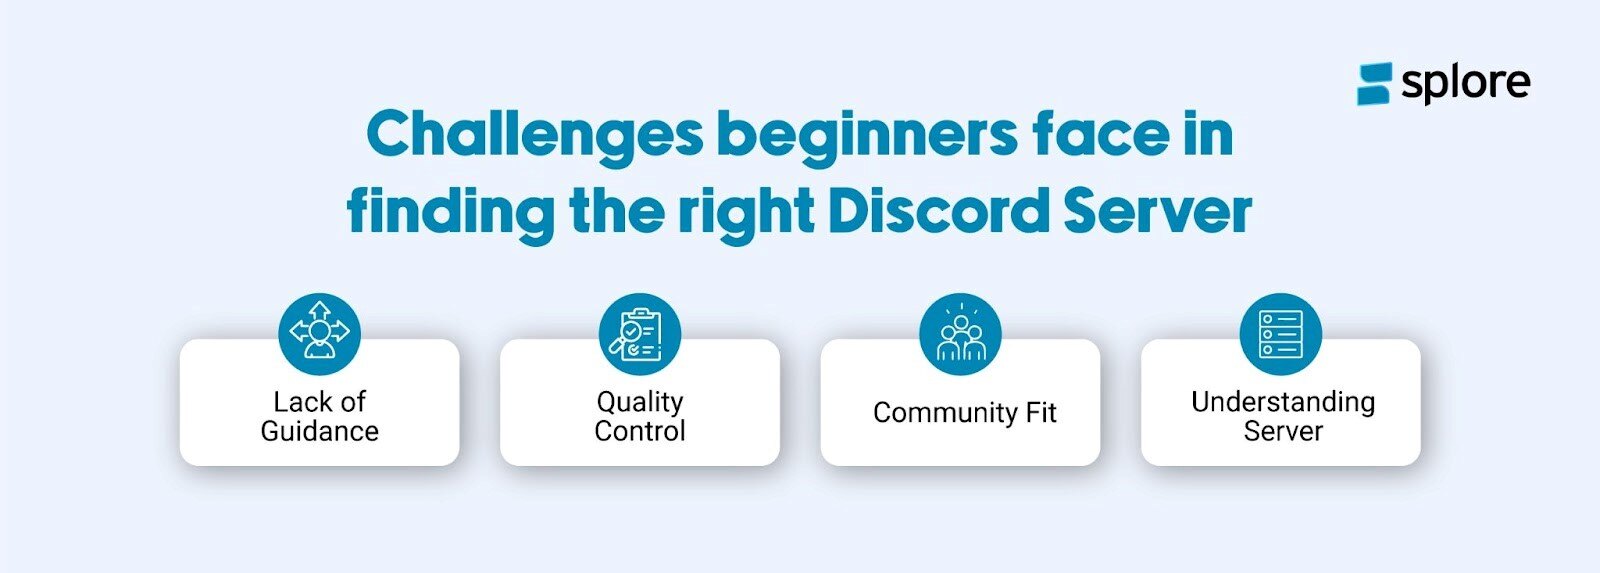 Challenges beginners face in finding the right discord server